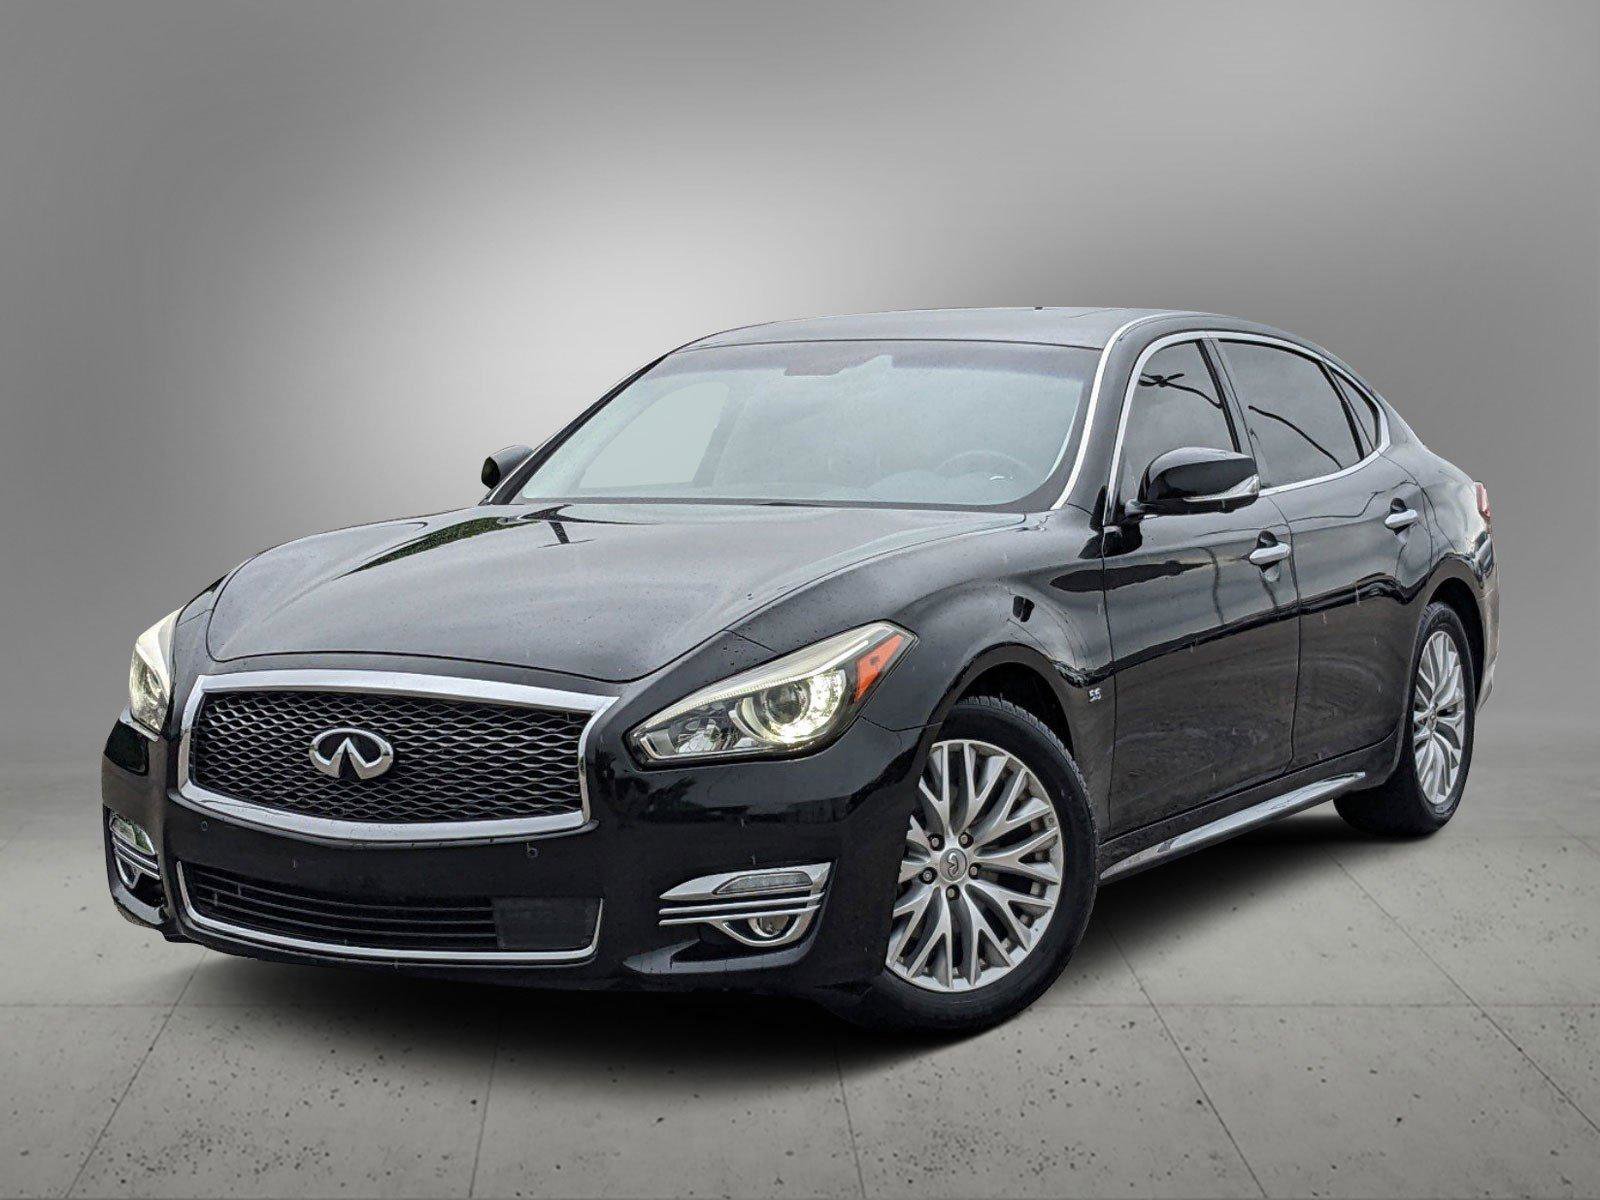 Used 2015 INFINITI Q70 for Sale Right Now - Autotrader